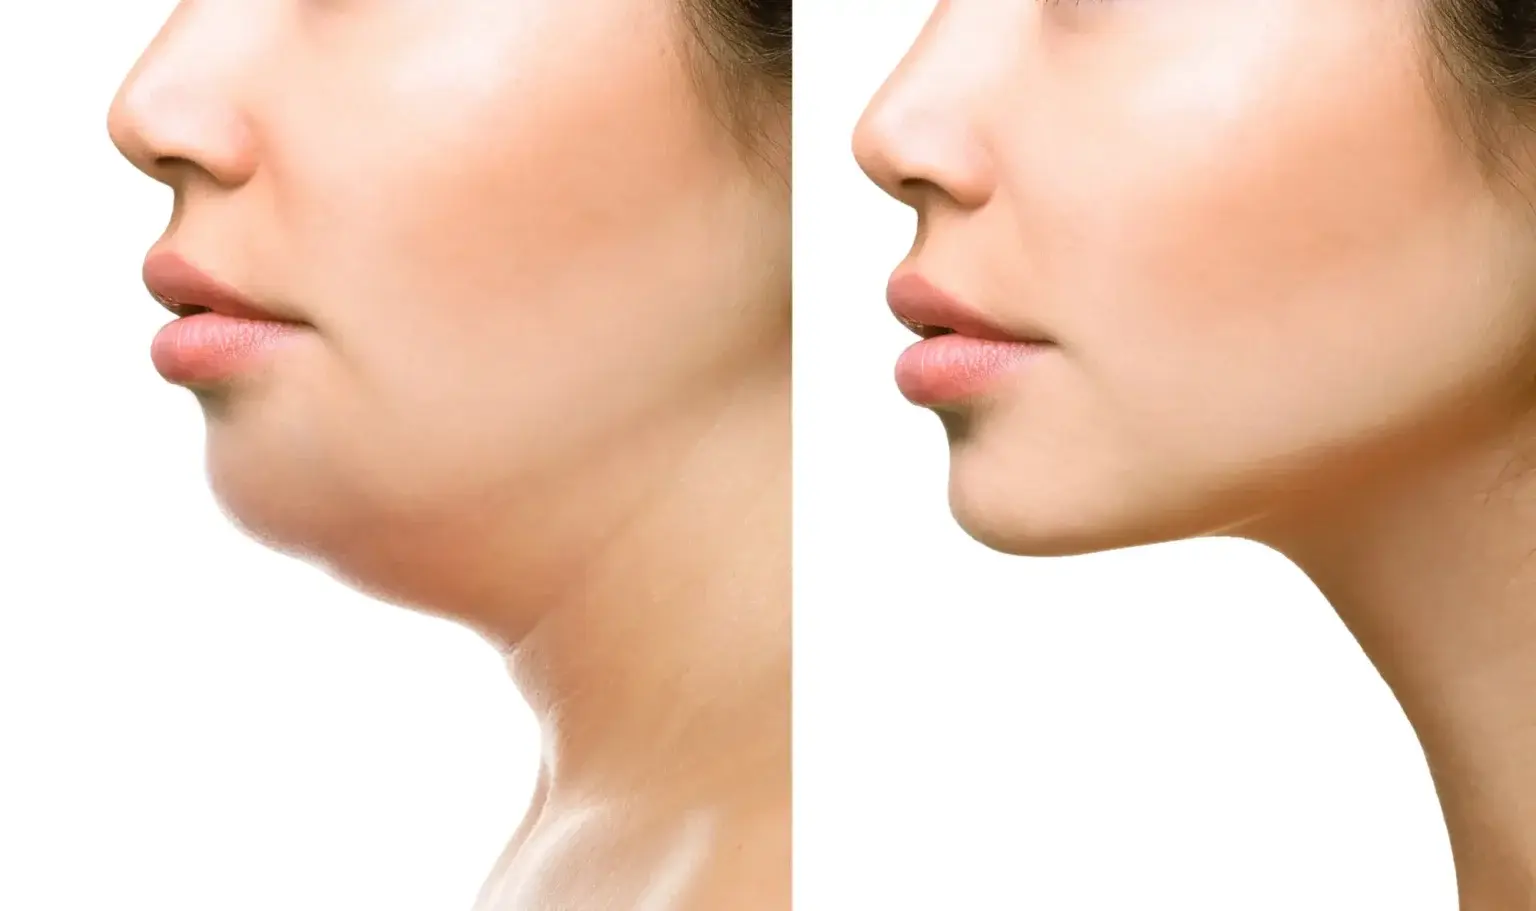 chin-before-and-after-results-webmedies-com